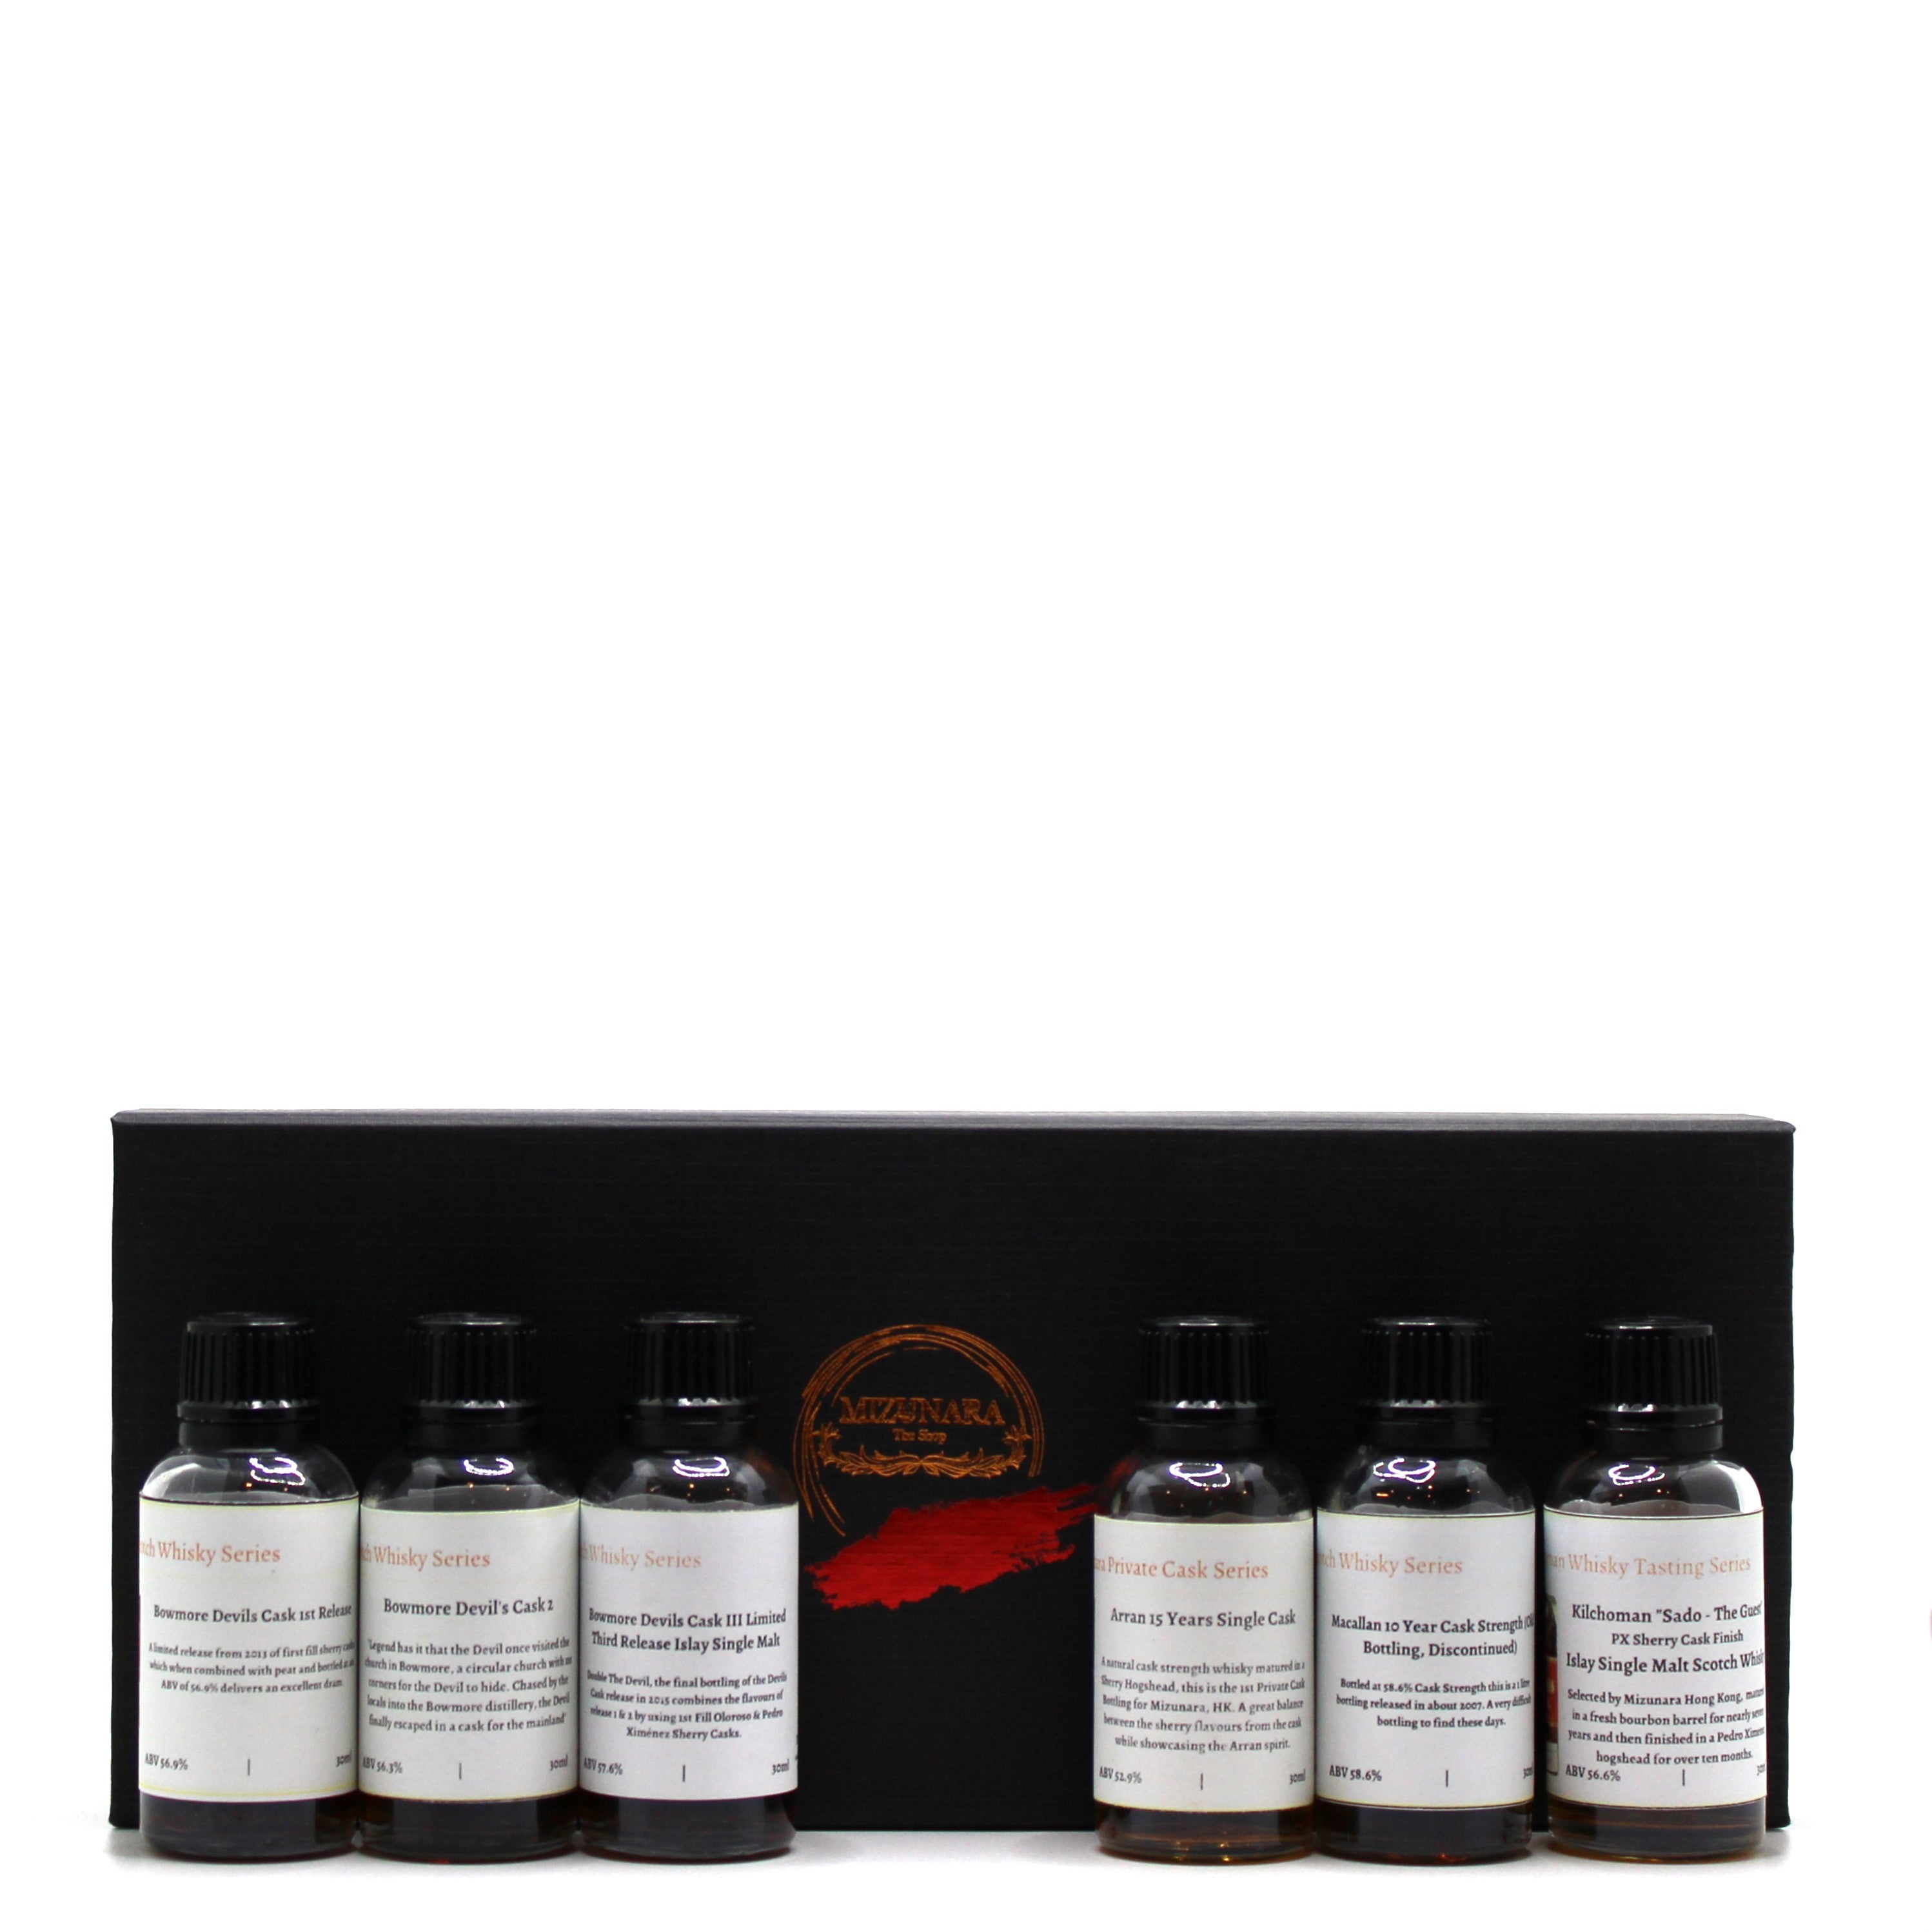 Bowmore Devil Cask Limited Edition Release I | ABV 56.9%  Bowmore Devil Cask Limited Edition Release II | ABV 56.3%  Bowmore Devil Cask Limited Edition Release III | ABV 56.7%  Macallan 10 Year Cask Strength (Old Bottling, Discontinued) | ABV 59.3%  Arran 15 Years Single Cask (Mizunara Pvt Cask) | ABV 52.9%  Kilchoman Single Cask (Mizunara Private Cask) PX Finish | 56.6%